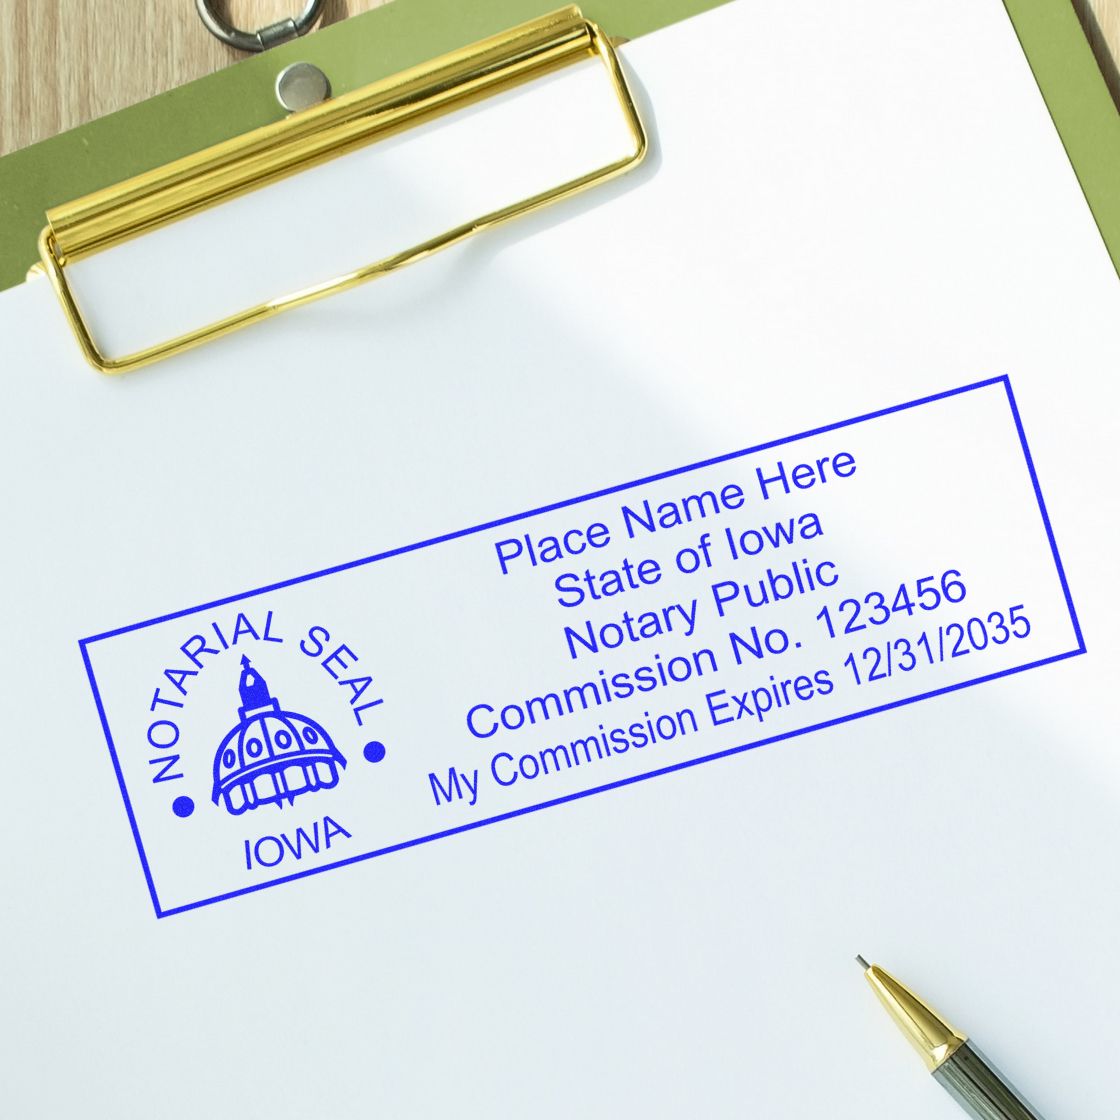 The main image for the Super Slim Iowa Notary Public Stamp depicting a sample of the imprint and electronic files